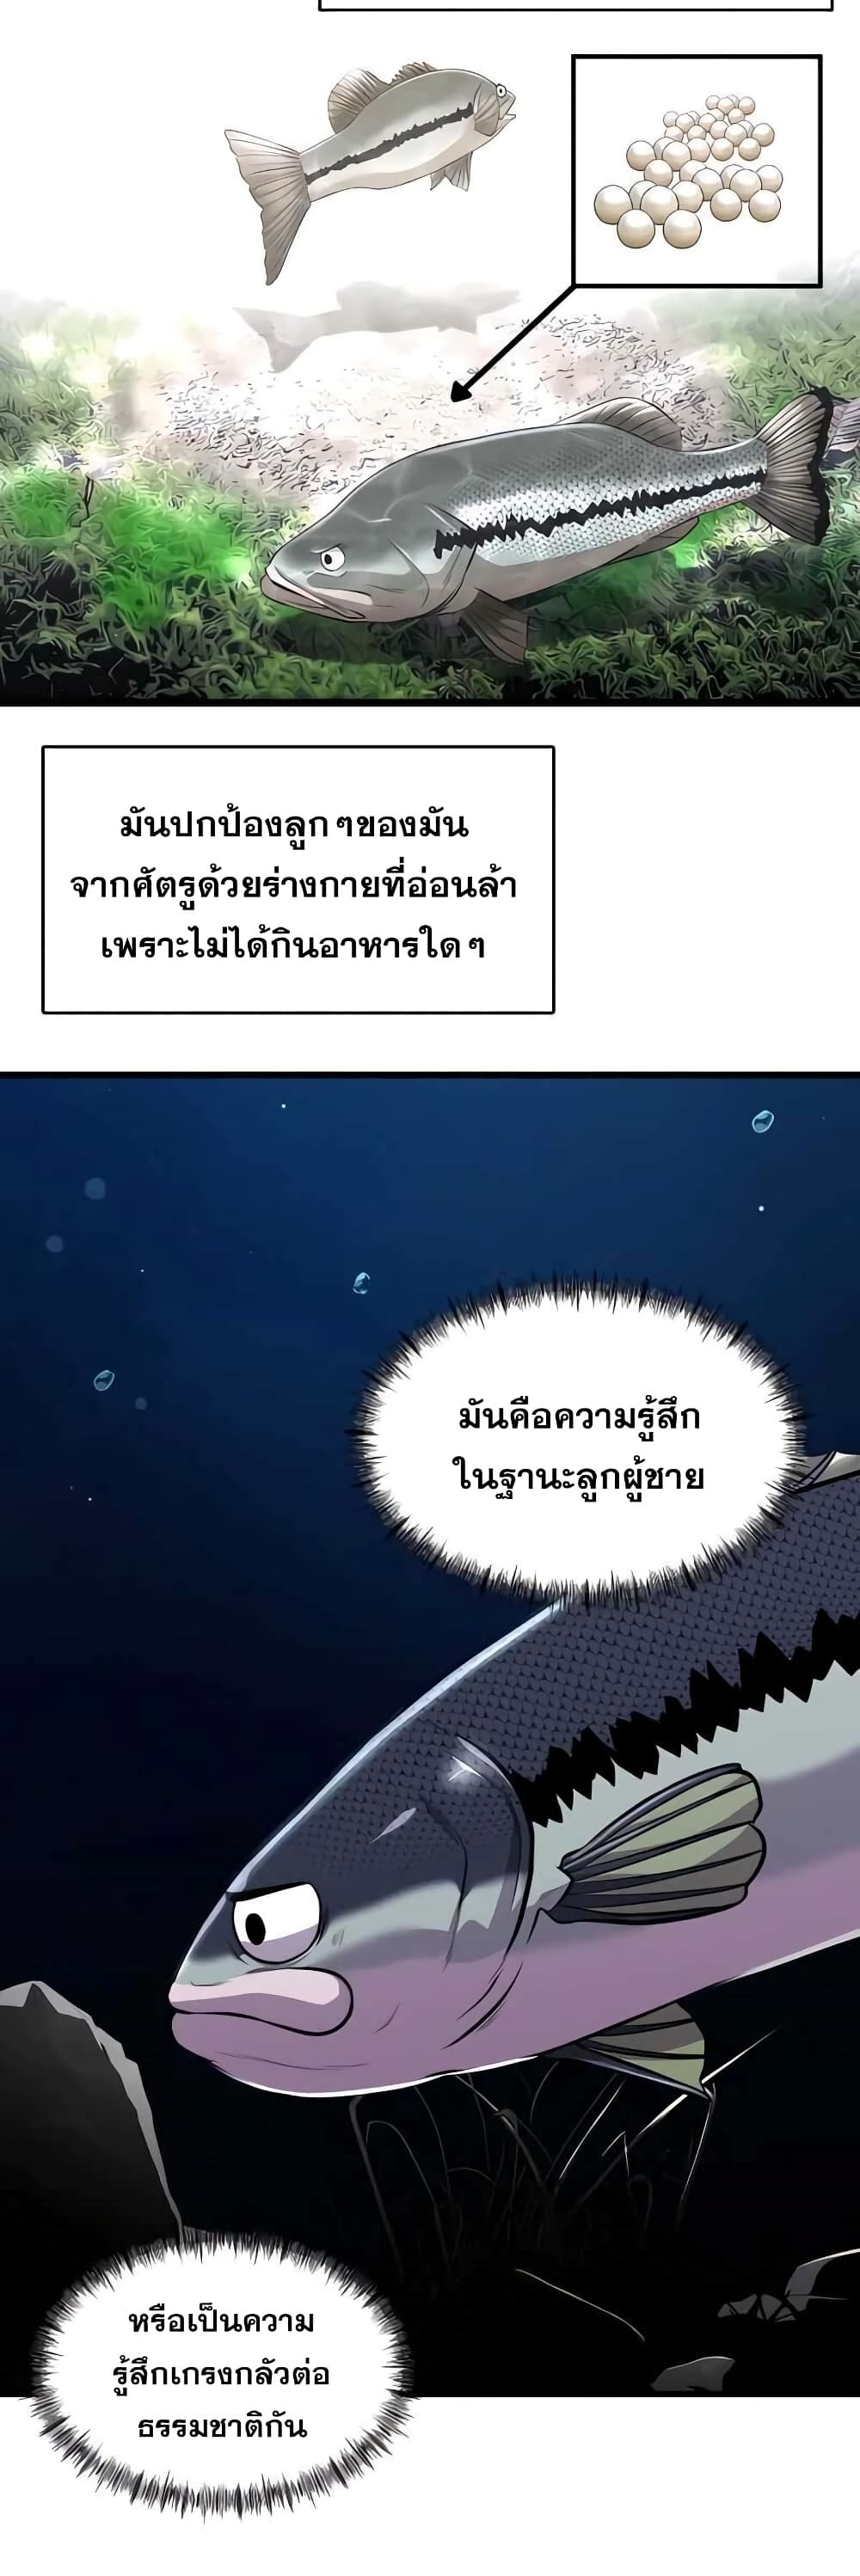 Surviving As a Fish ตอนที่ 3 (21)